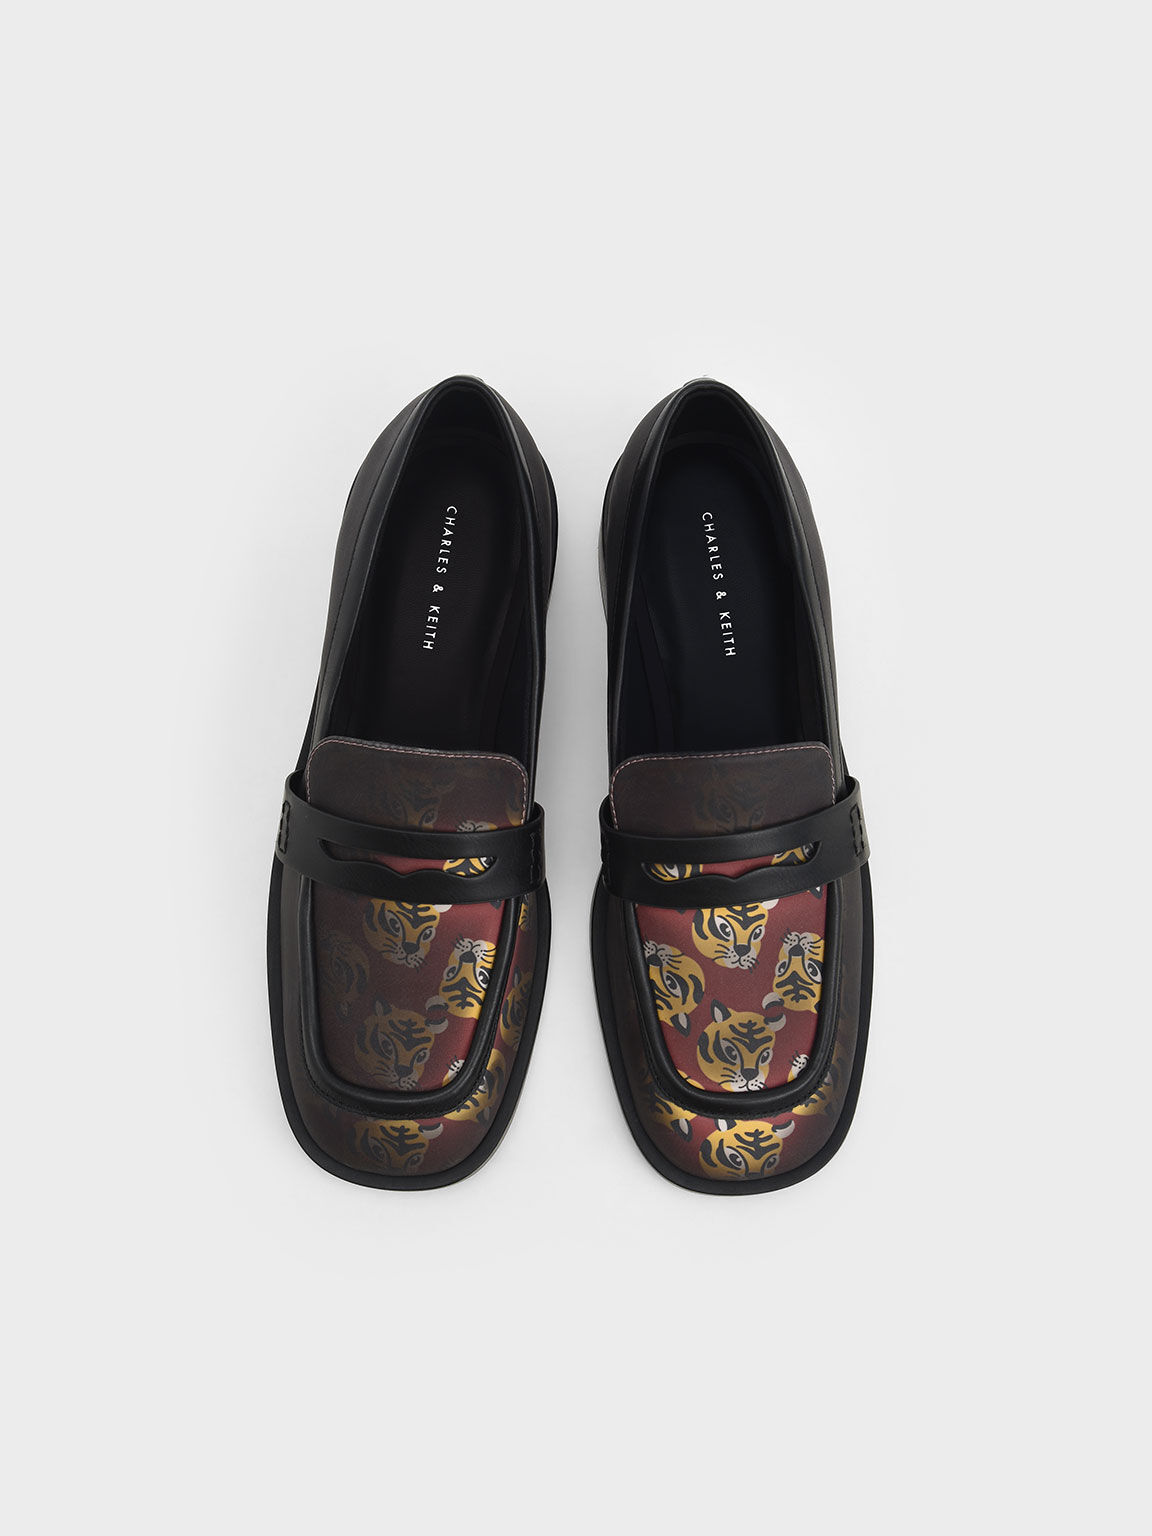 Lunar New Year Collection: Antonia Heat-Reactive Penny Loafers, Black, hi-res